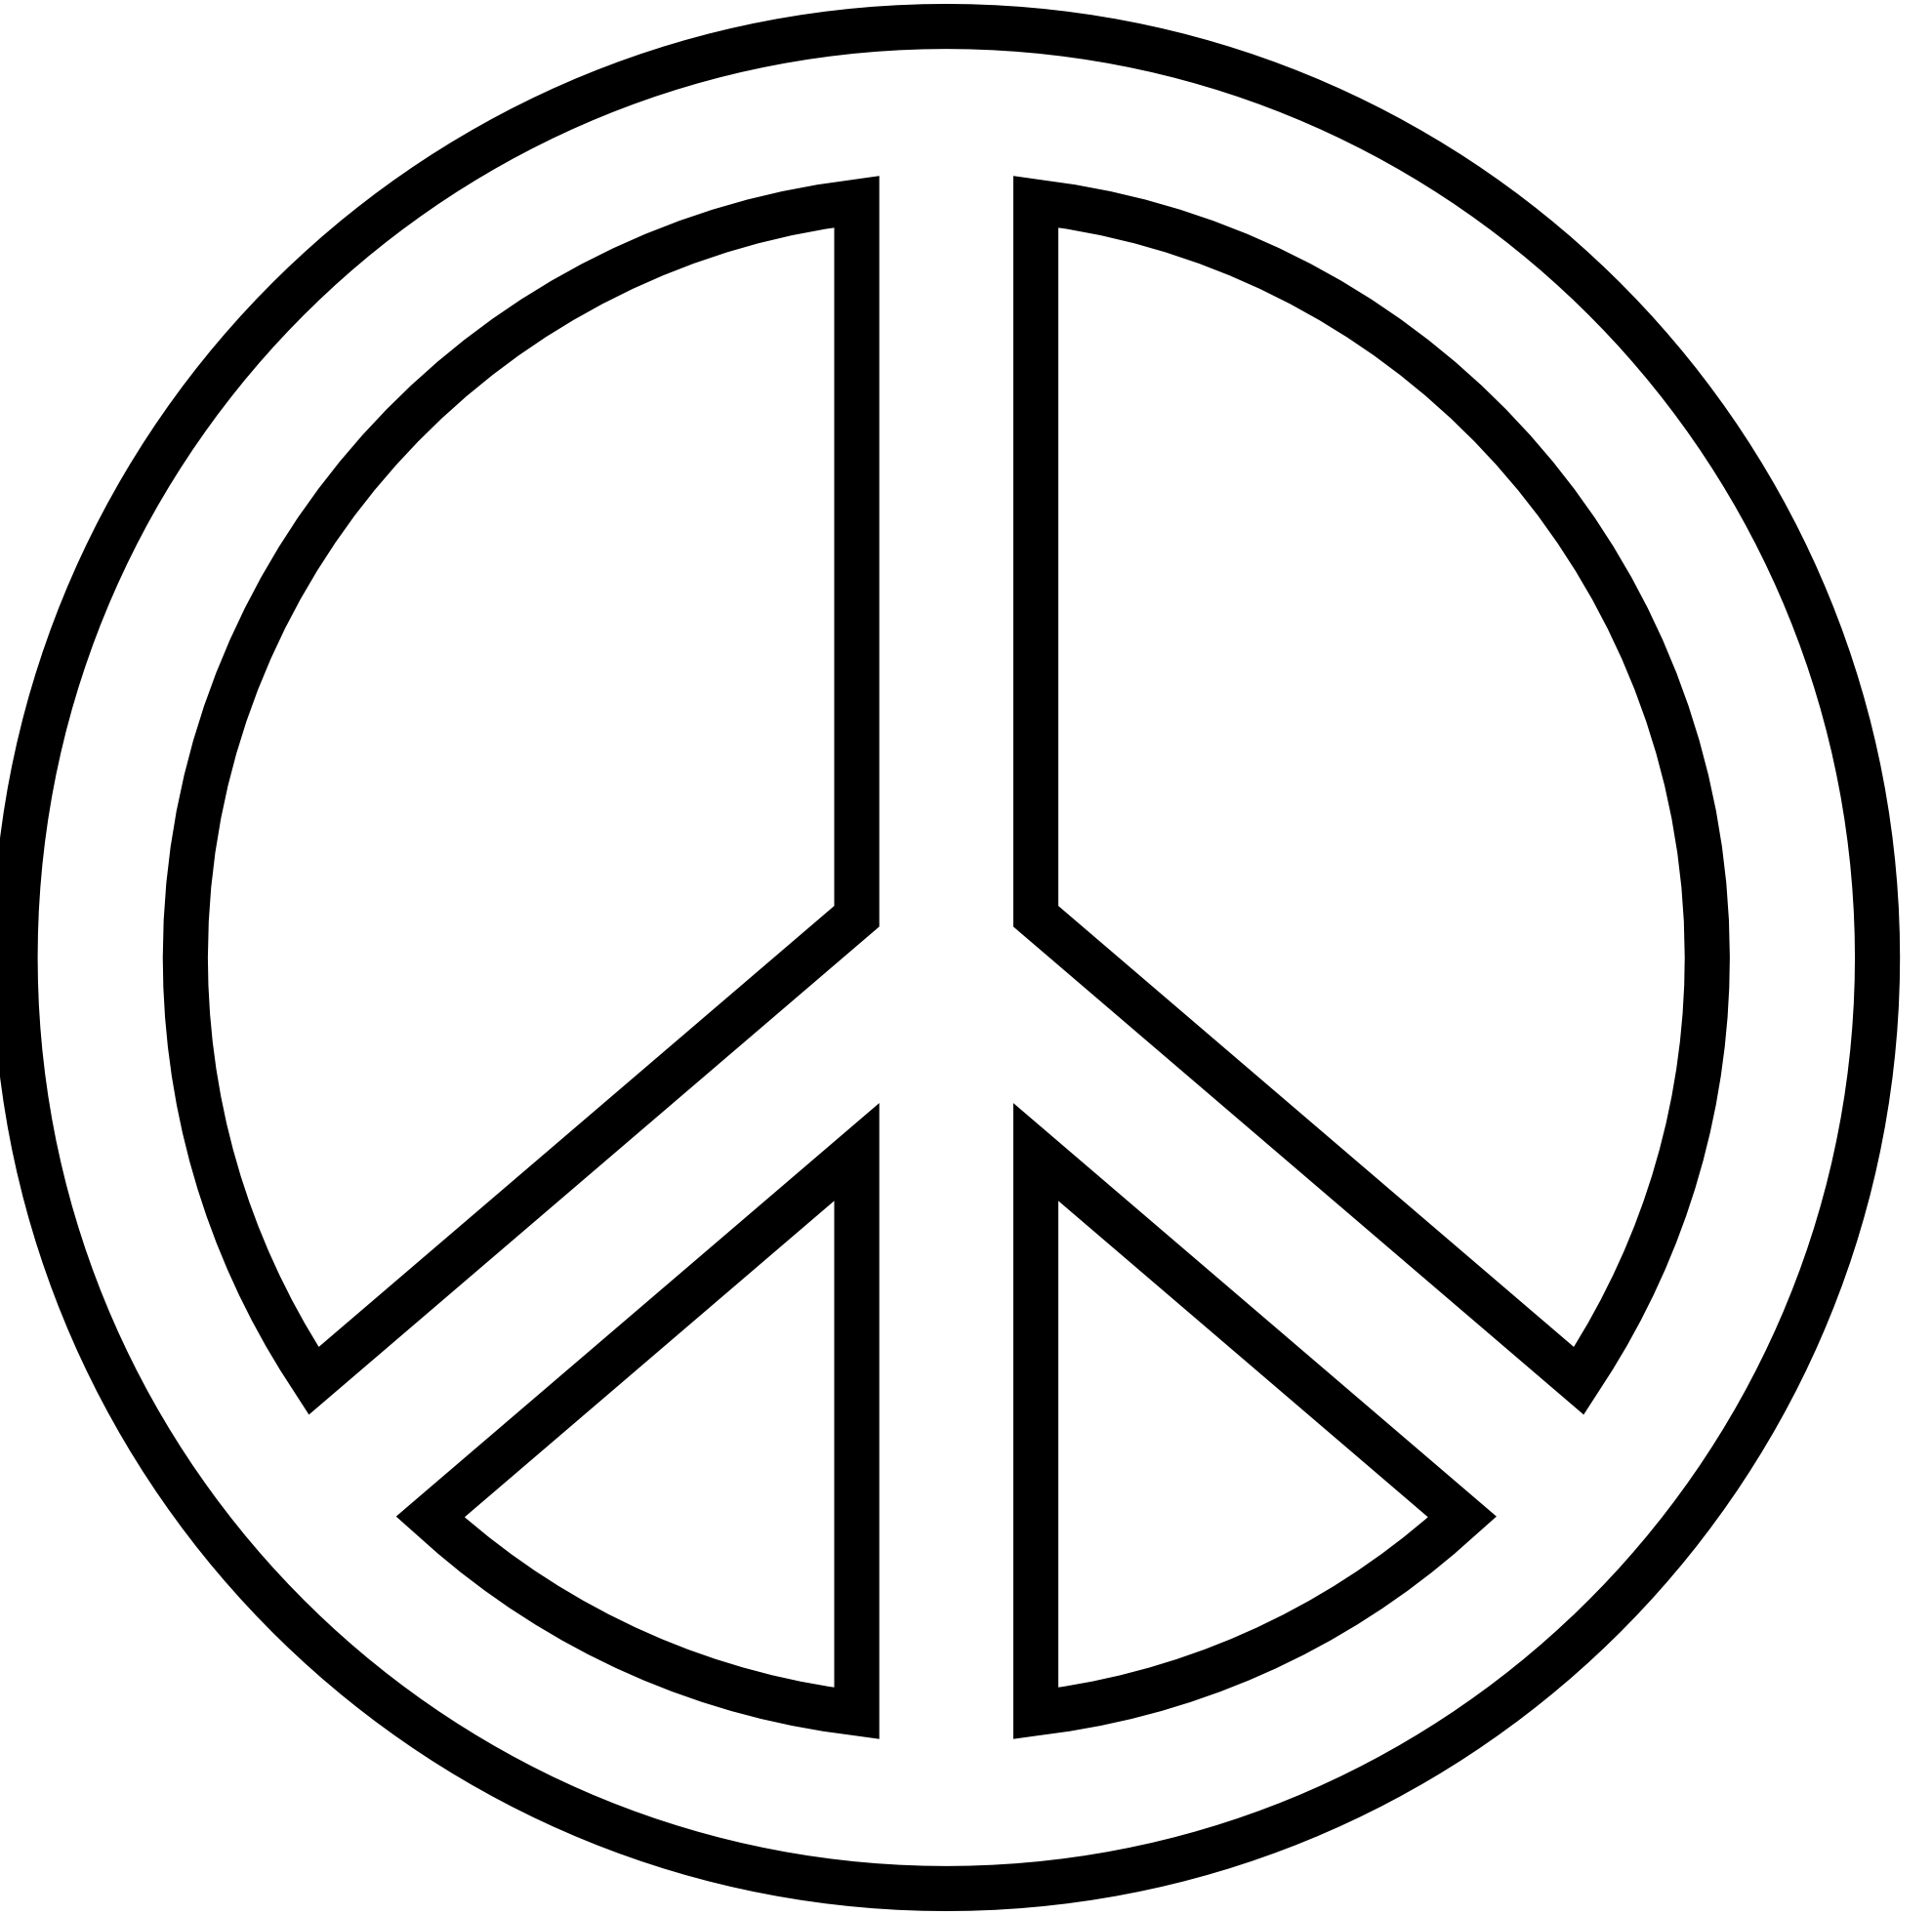 Zebra Peace Sign Clipart | Clipart library - Free Clipart Images